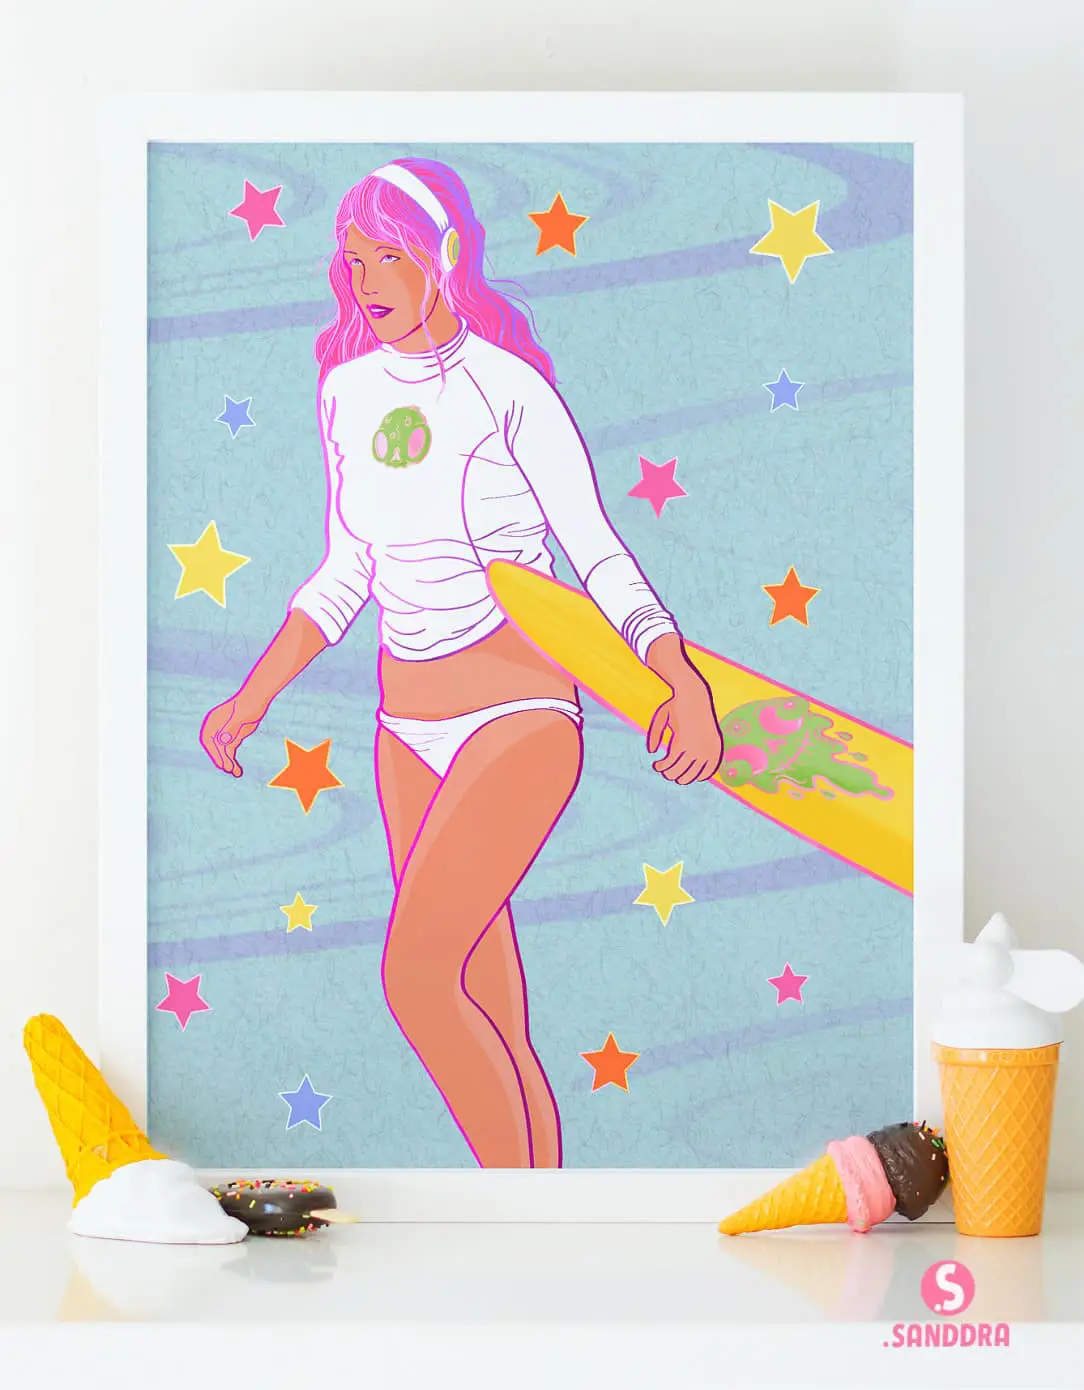 Home page pop art style digital illustration poster of colorful pink hair surfer woman